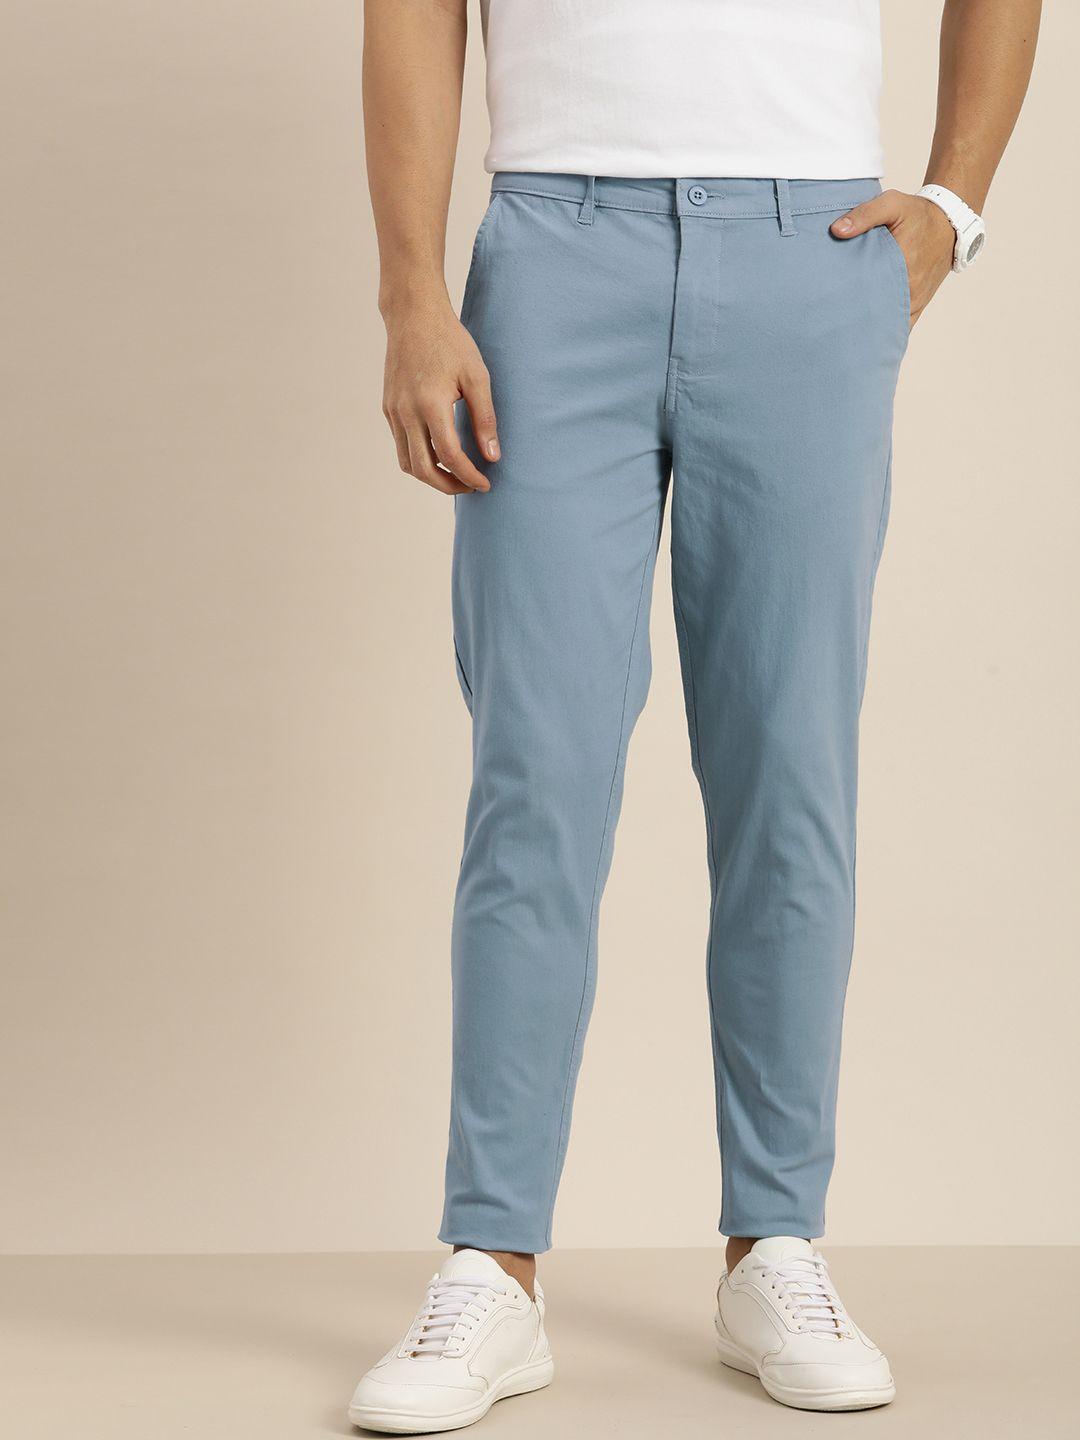 difference of opinion men solid chinos trousers